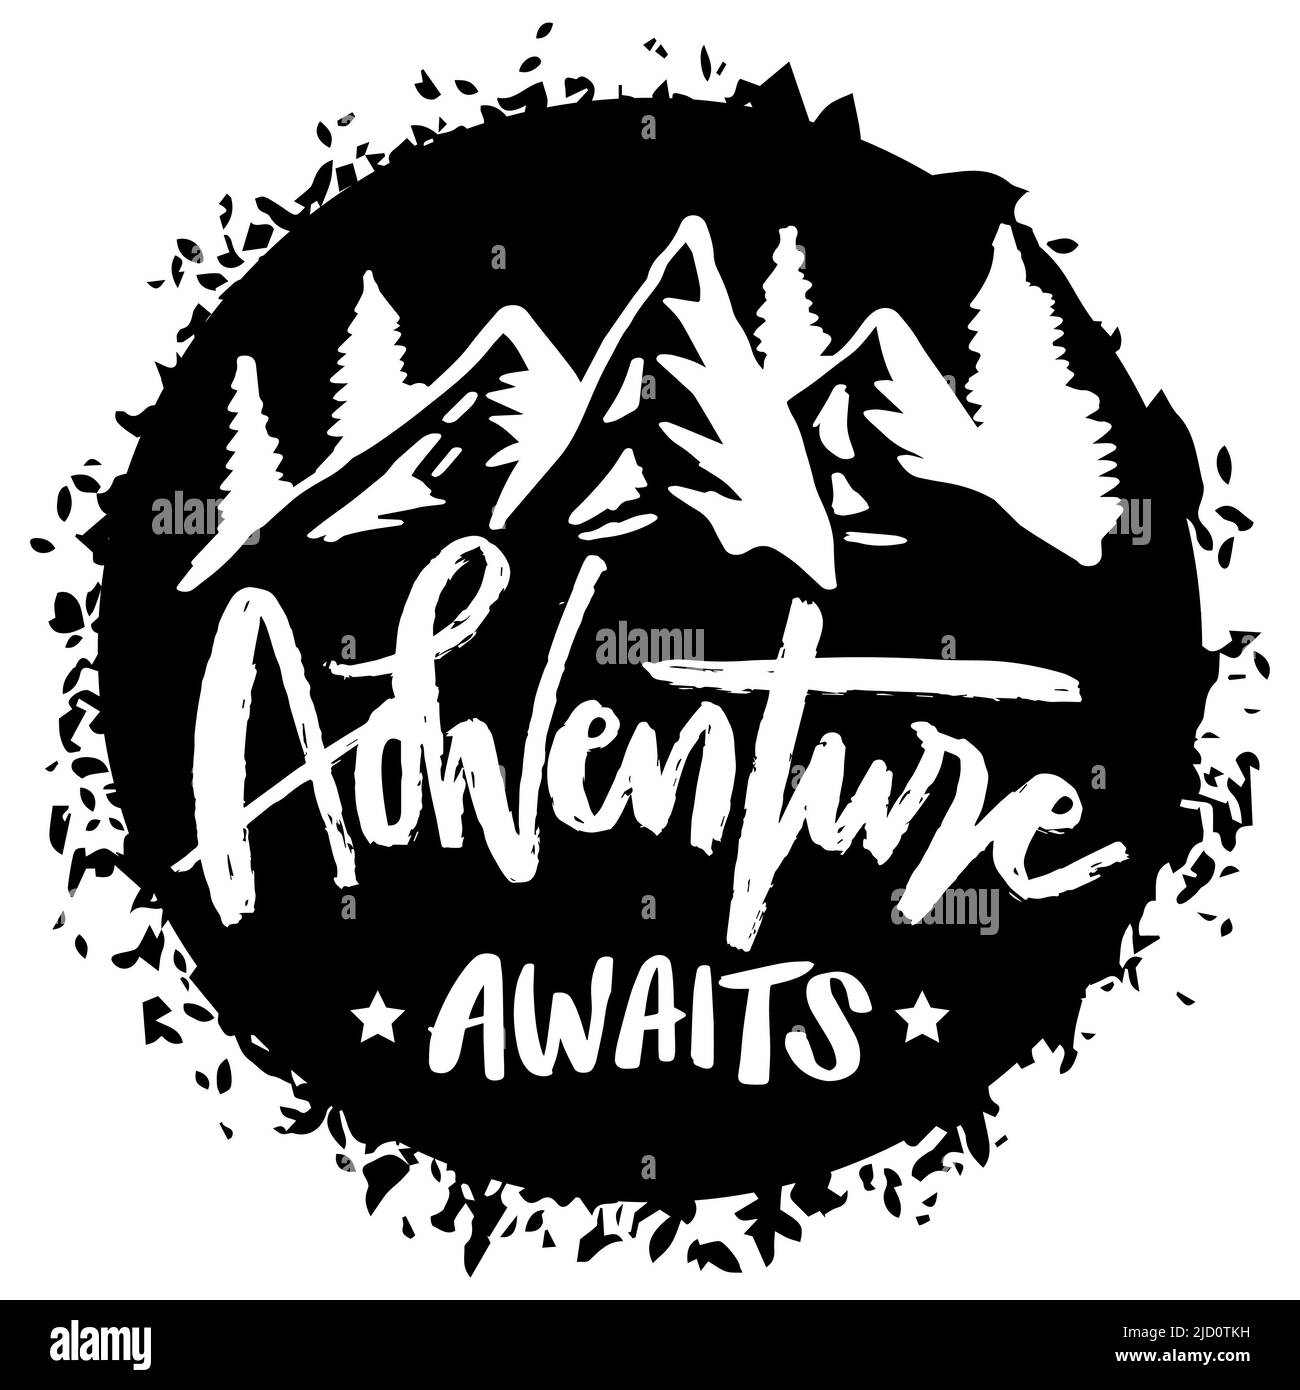 Adventure awaits. Hand lettering. Poster quotes. Stock Photo